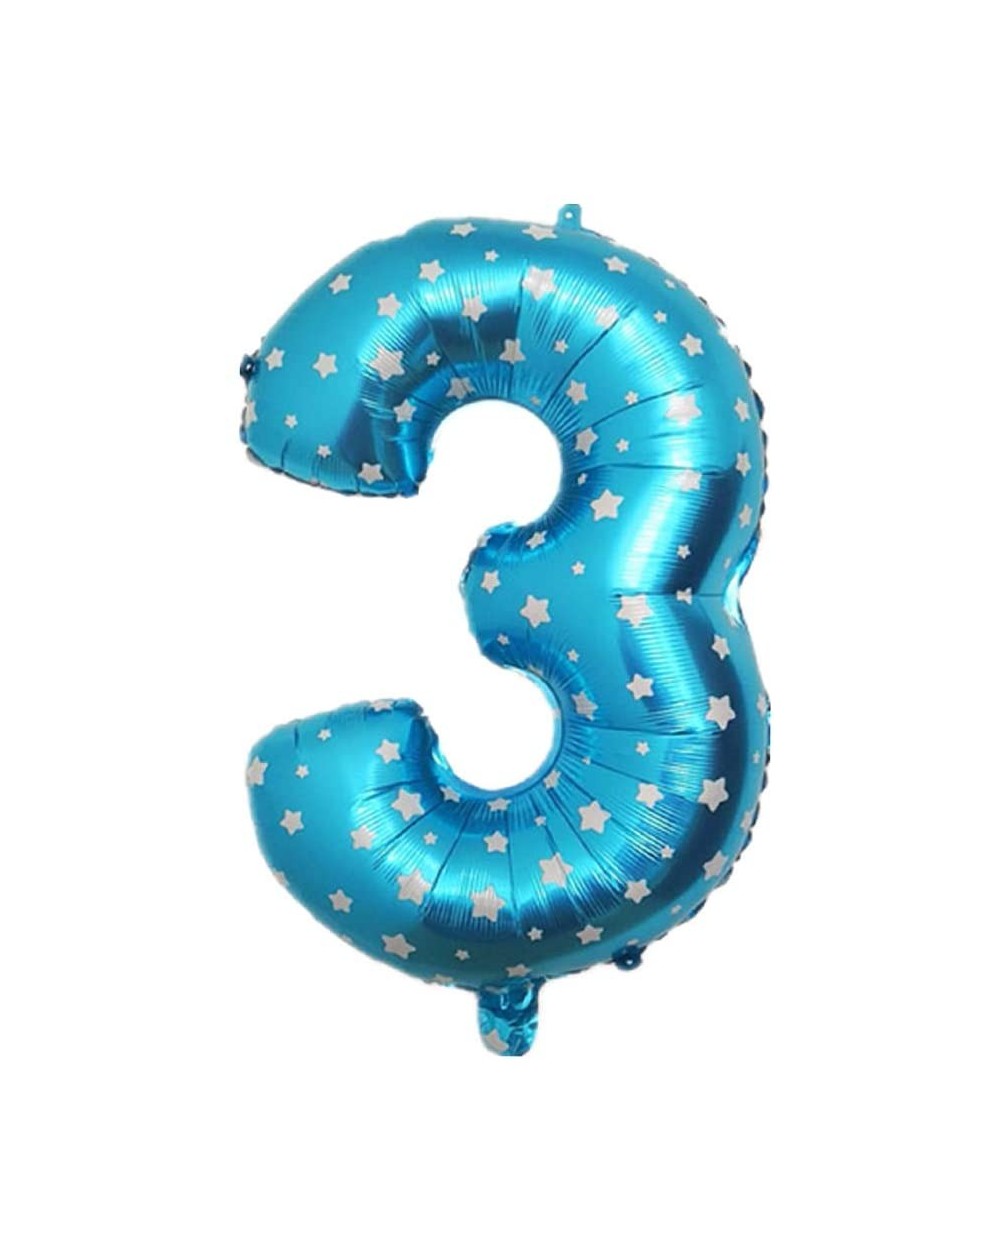 Balloons 32 Inch Large Printed Blue Number Balloons Foil Helium Balloons Birthday Party Wedding Bachelorette Bridal Shower Gr...